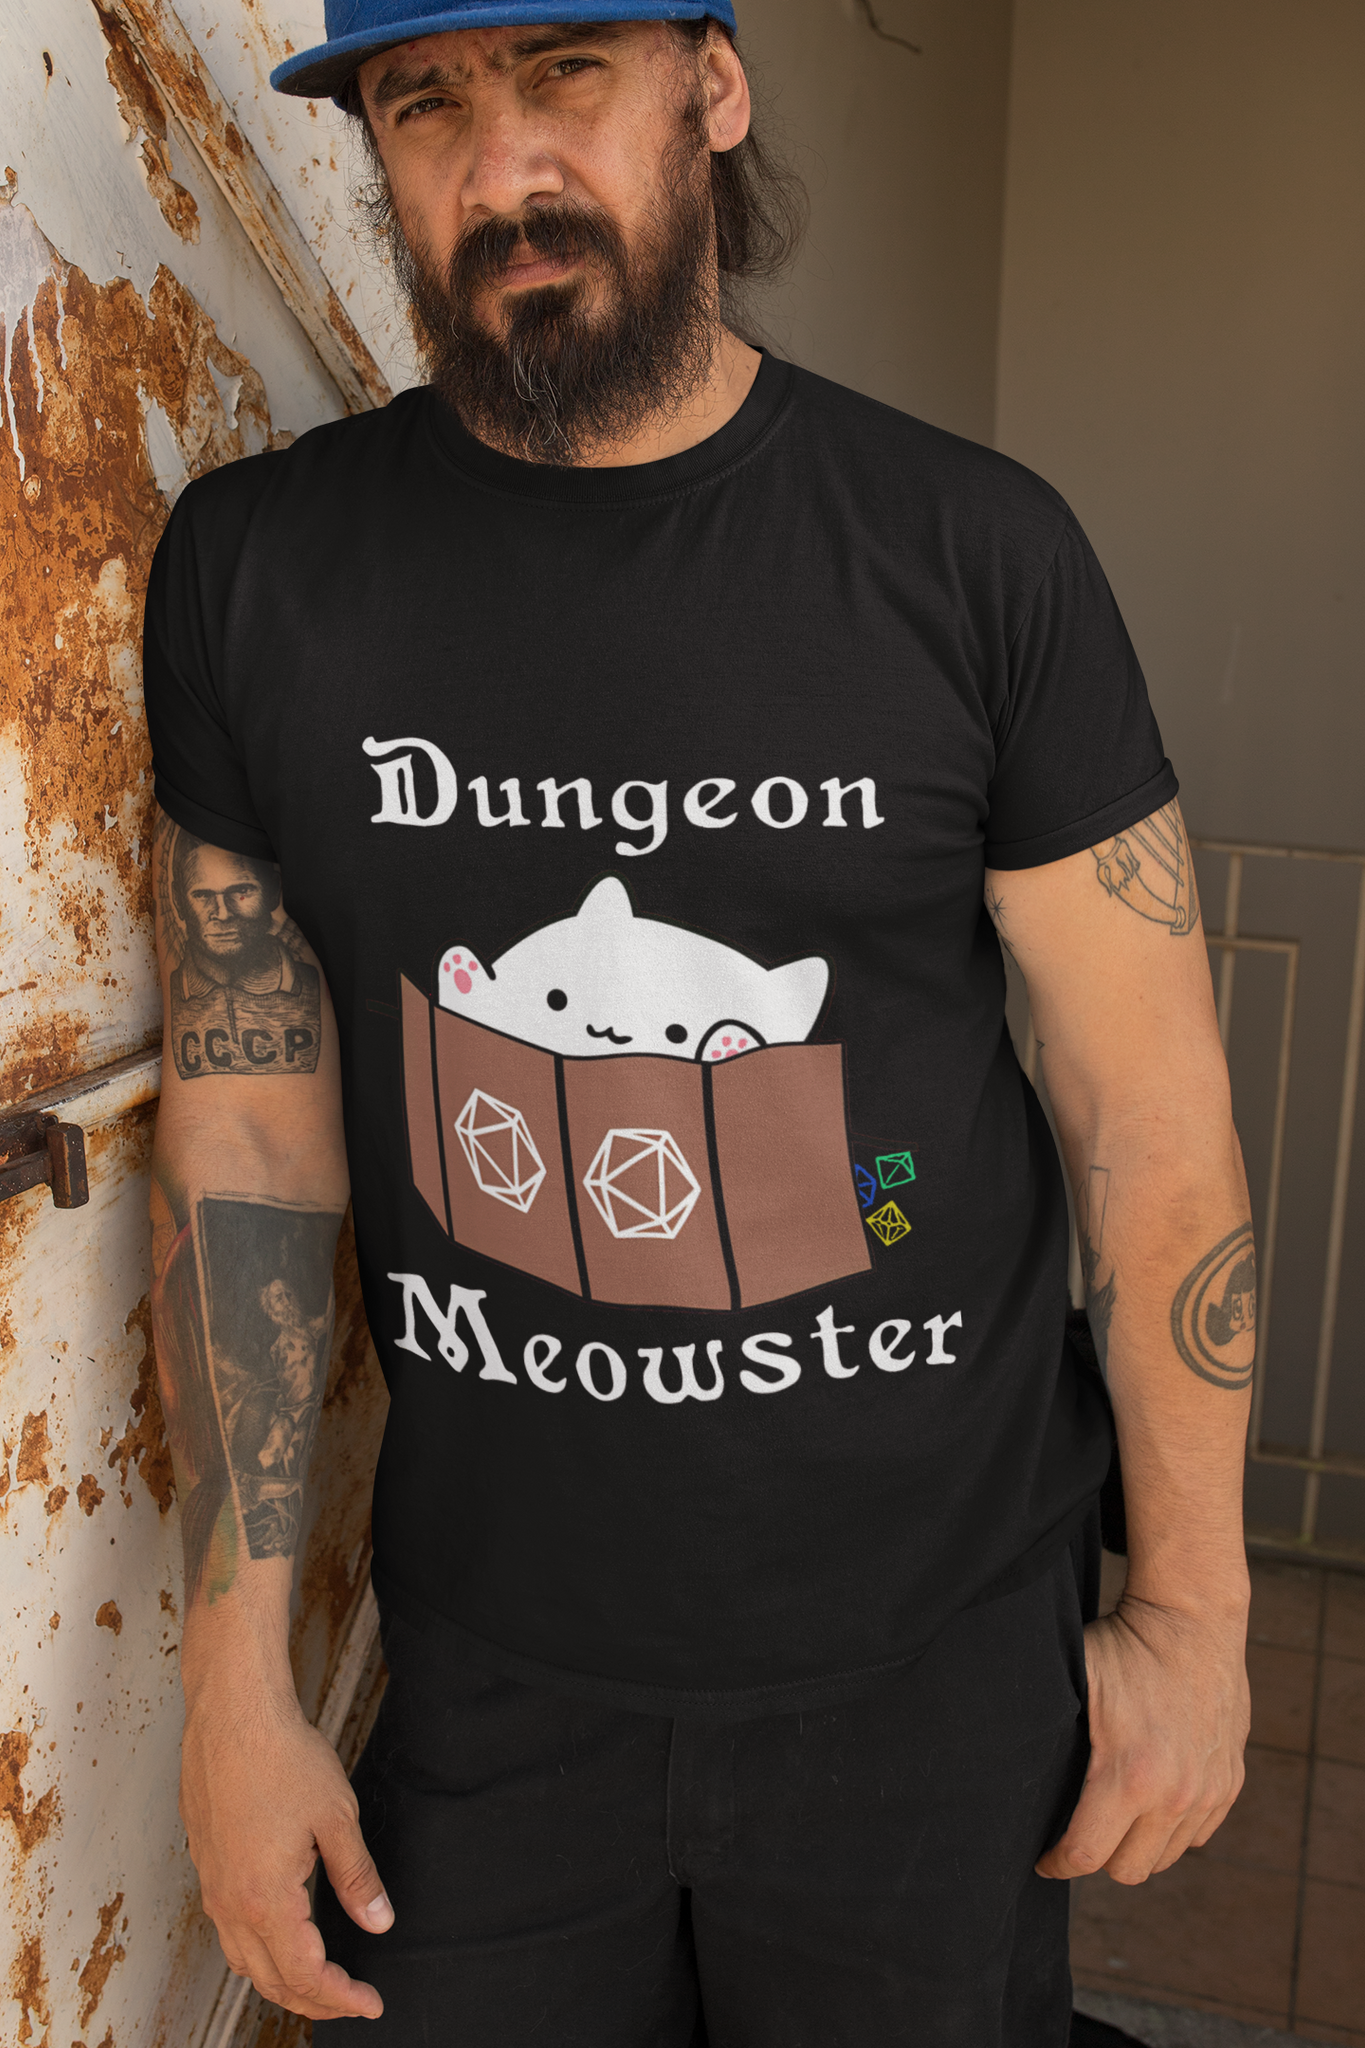 Dungeon And Dragon T Shirt, RPG Dice Games Tshirt, Cat Dungeon Meowster DND T Shirt